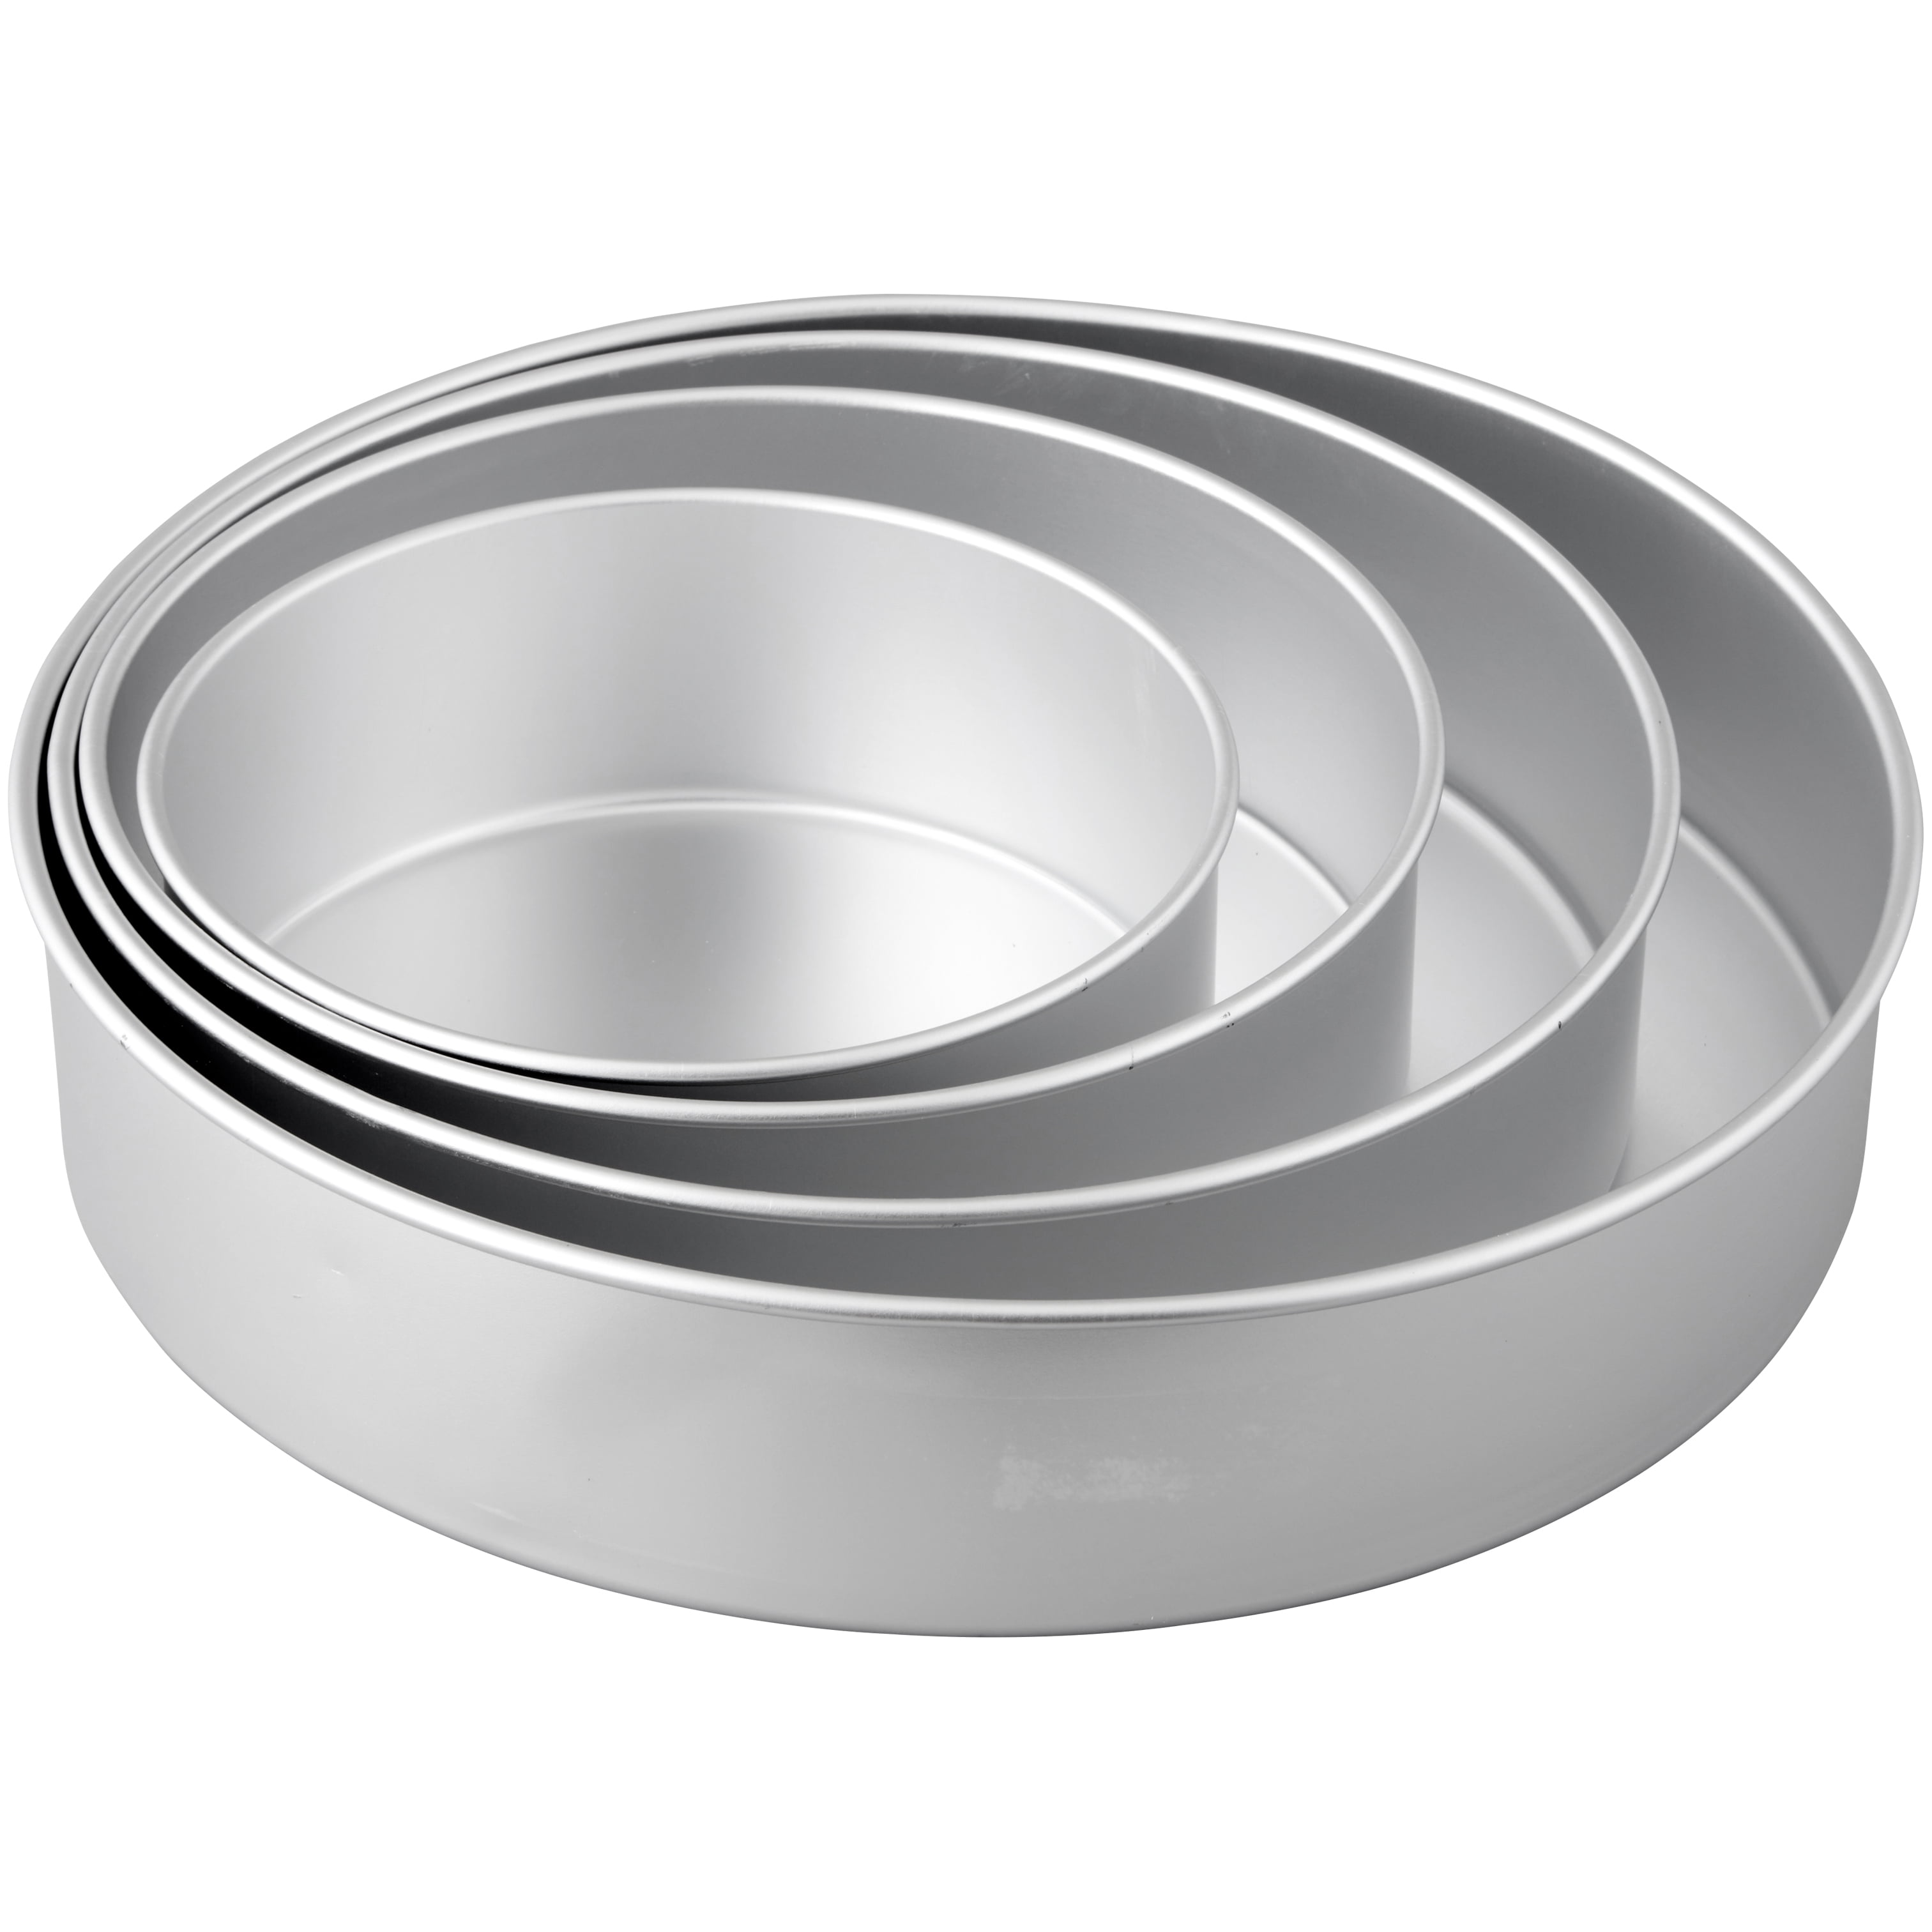 Walchoice Round Cake Pan set of 3, Non-stick Baking Pans for Home, Metal  Cake Tin with Stainless Steel Core, Includes 4/6/8 in Pans 